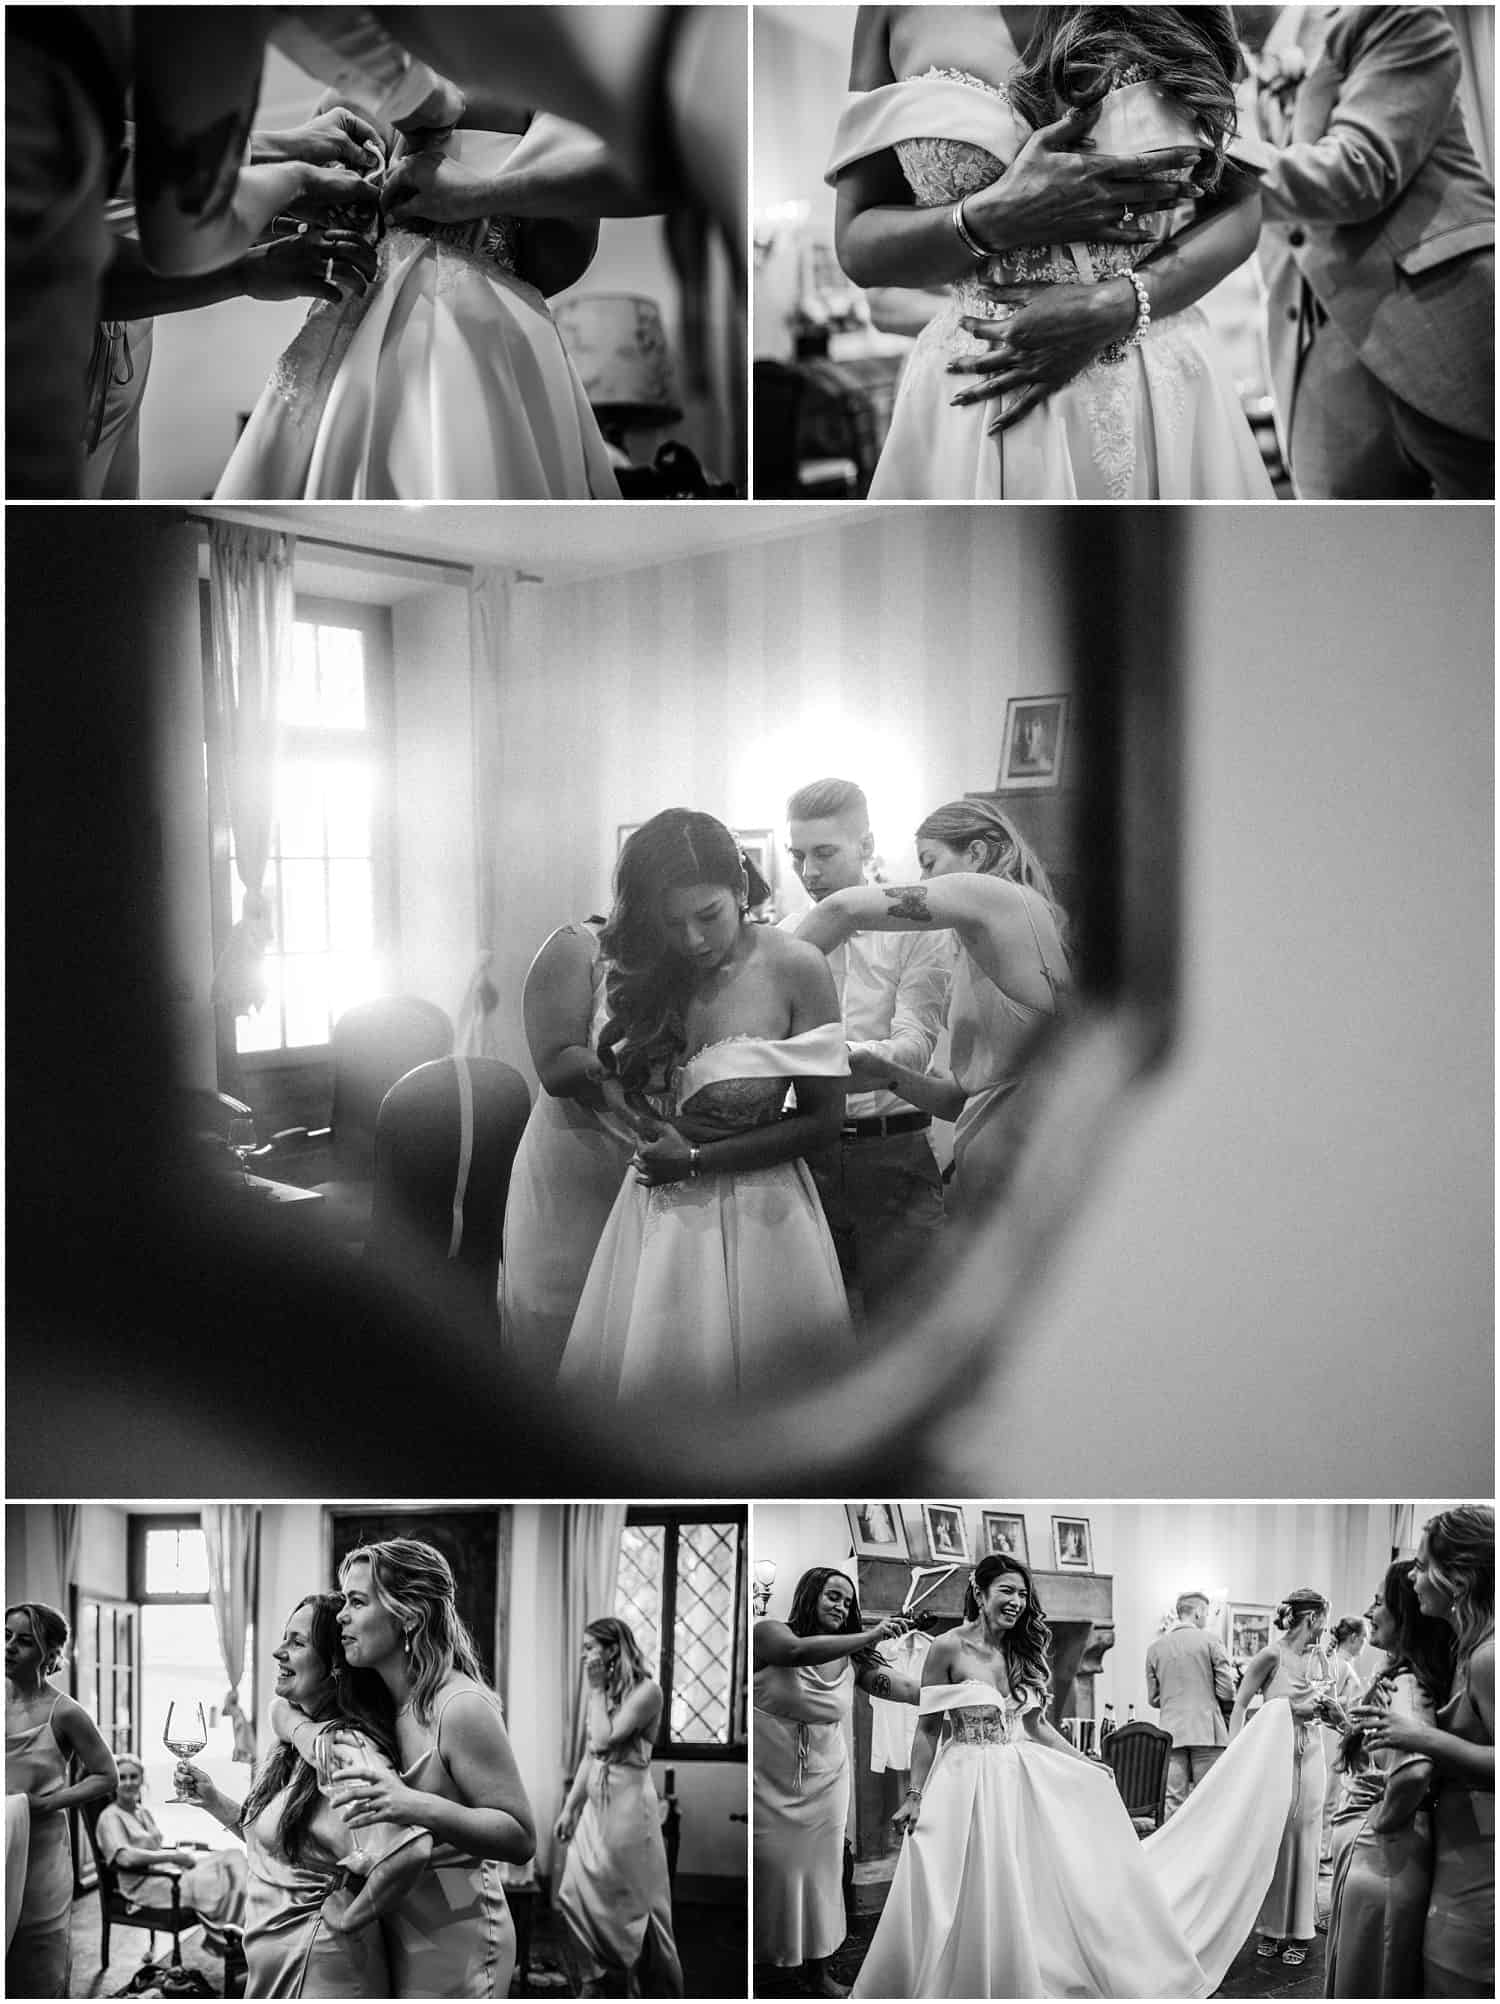 Bride getting dressed in her room at Borgo Castelvecchi in Tuscany, photos by Ludovica & Valerio, wedding photographers